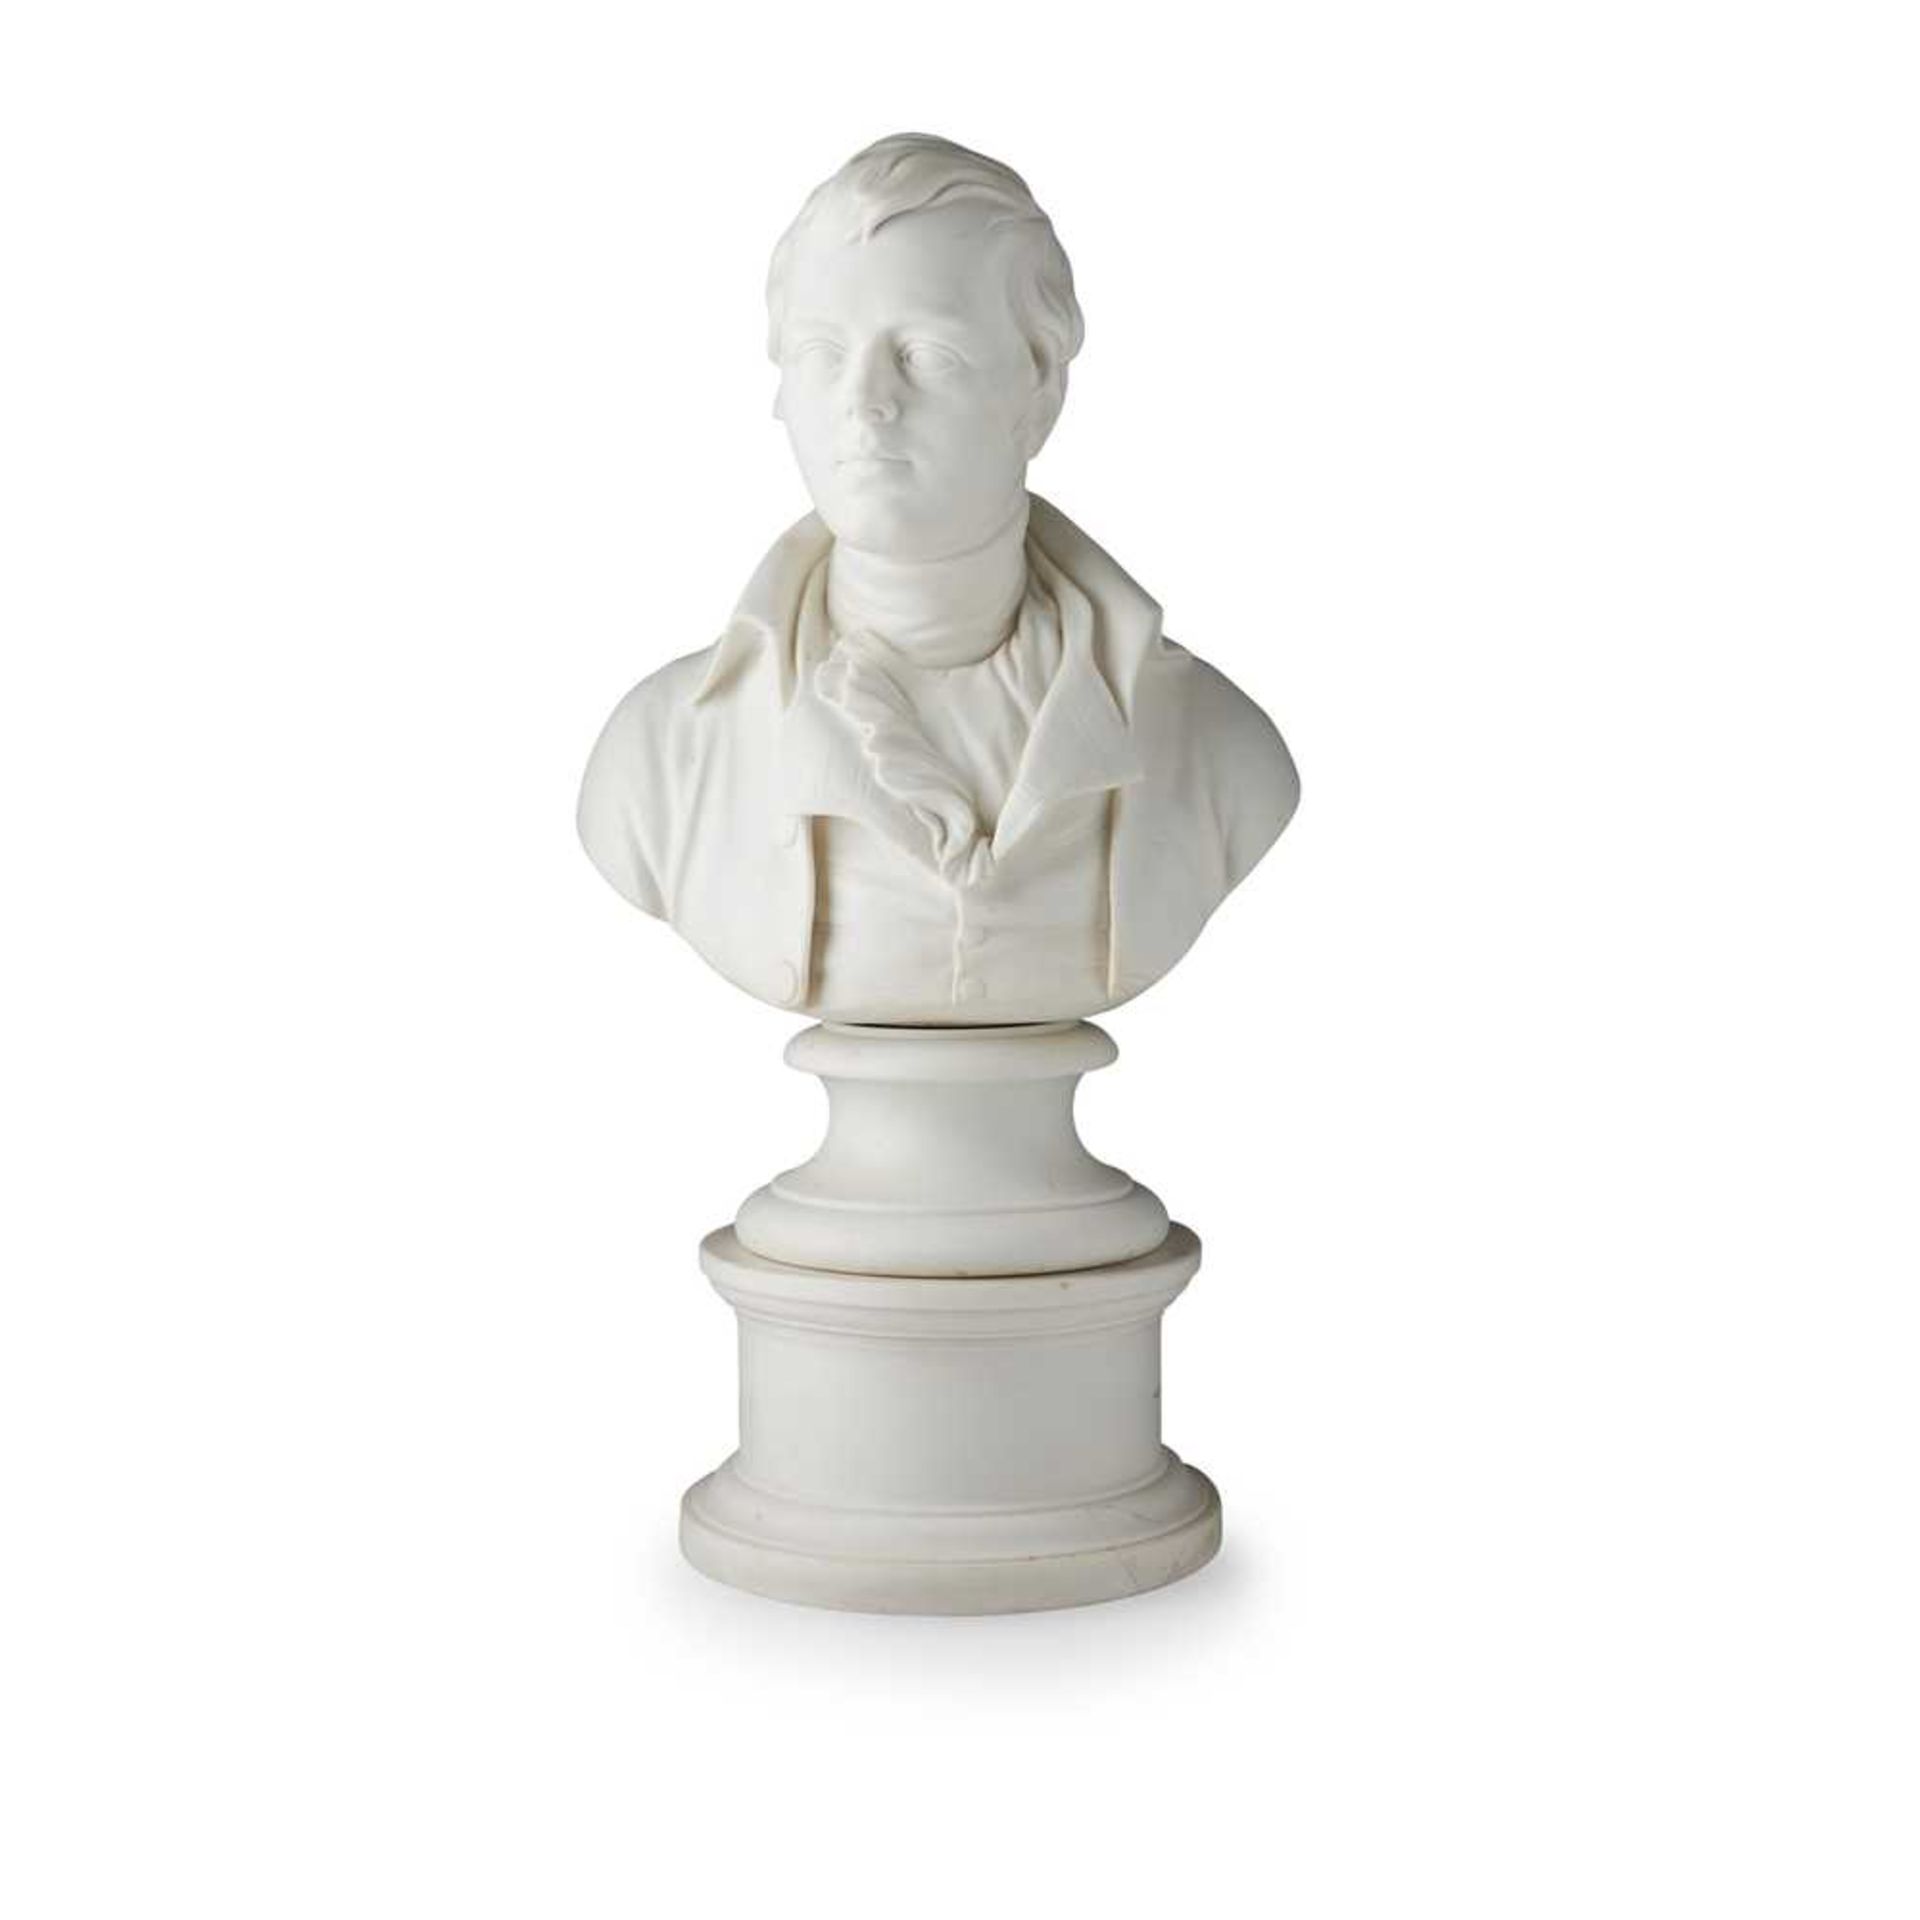 AFTER EDWARD WILLIAM WYON (1811-1885) PARIANWARE BUST OF ROBERT BURNS, 19TH CENTURY